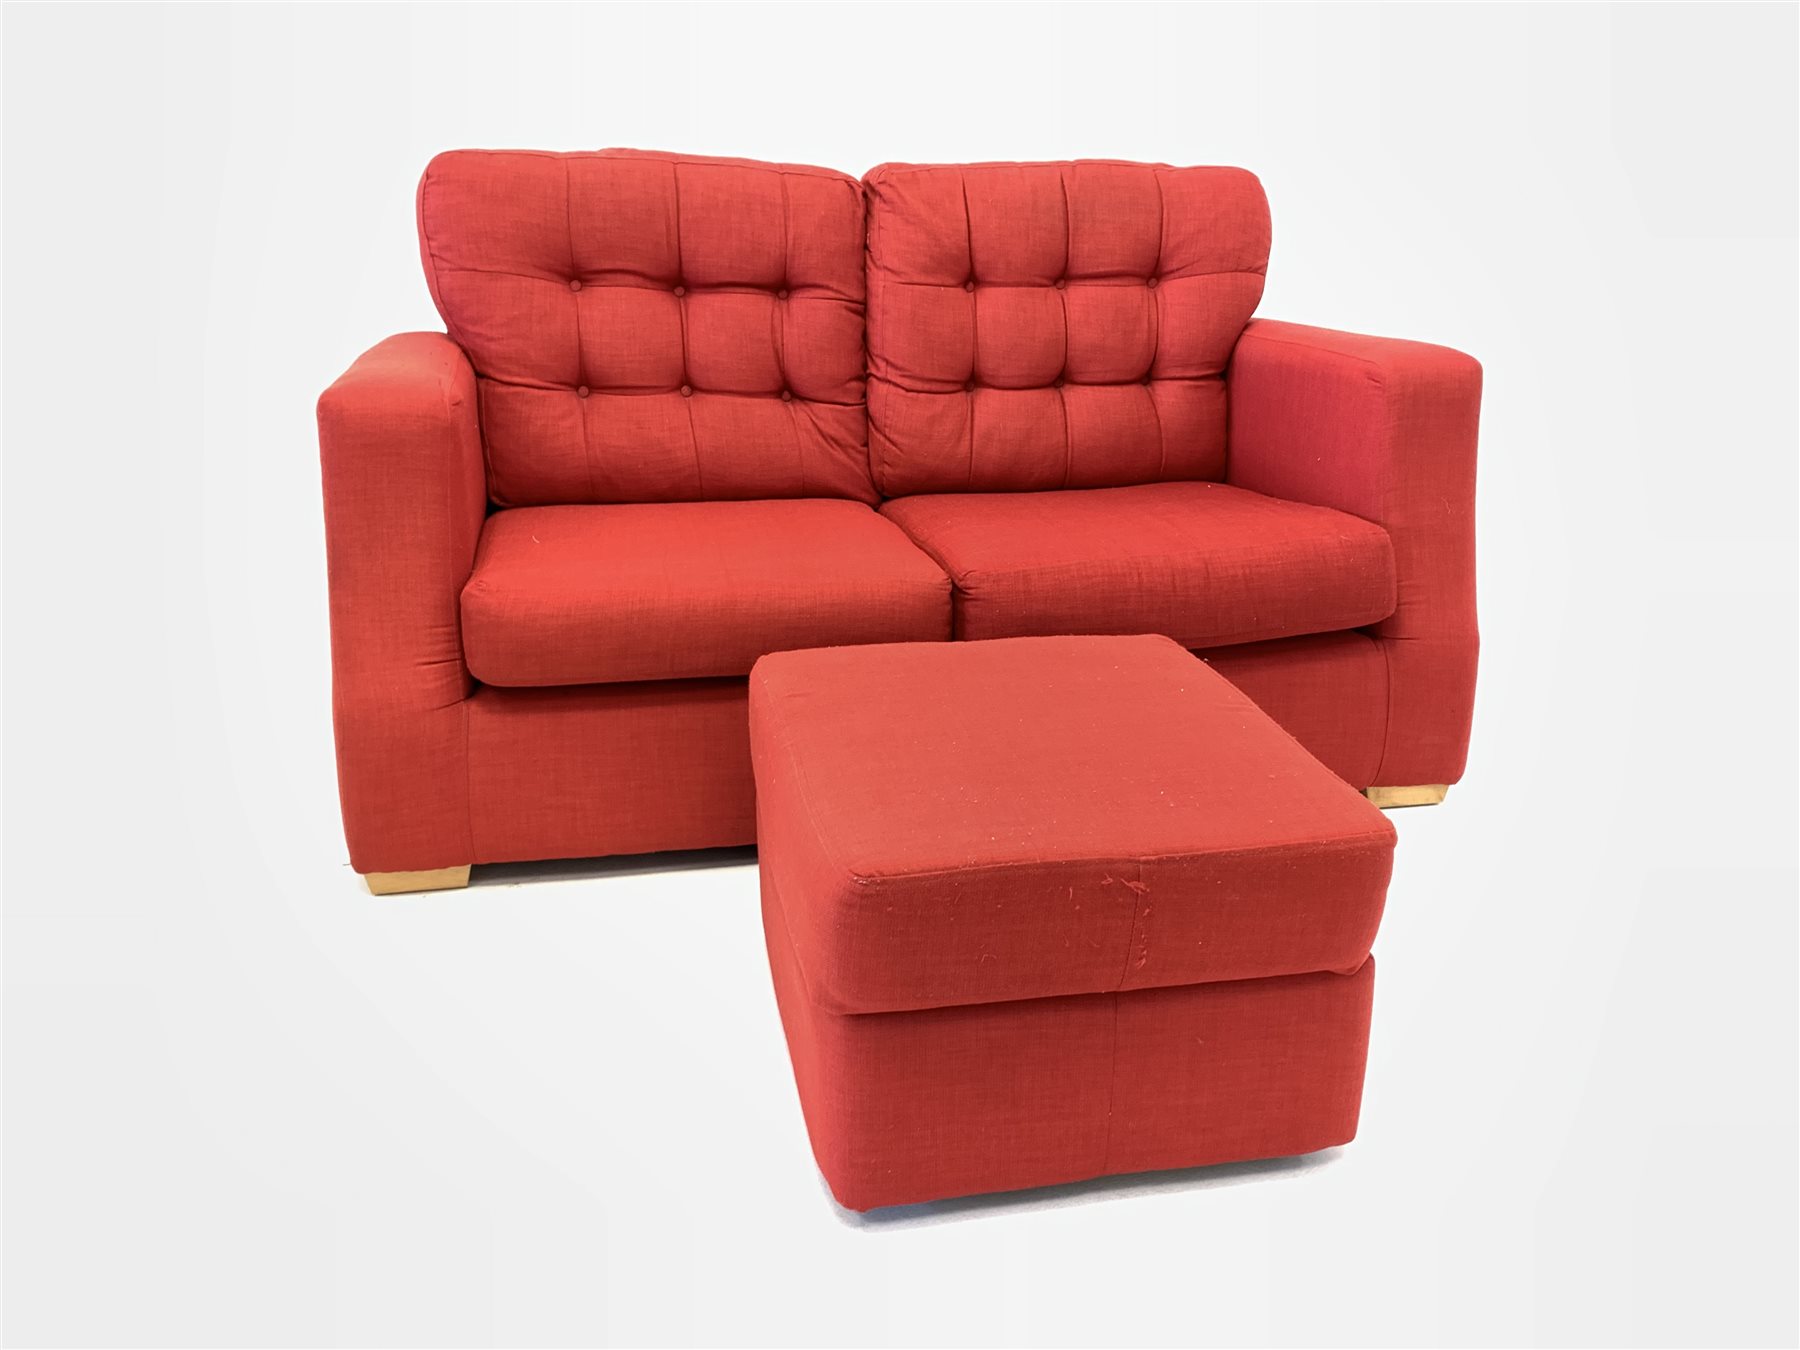 Contemporary two seat sofa - Image 2 of 2